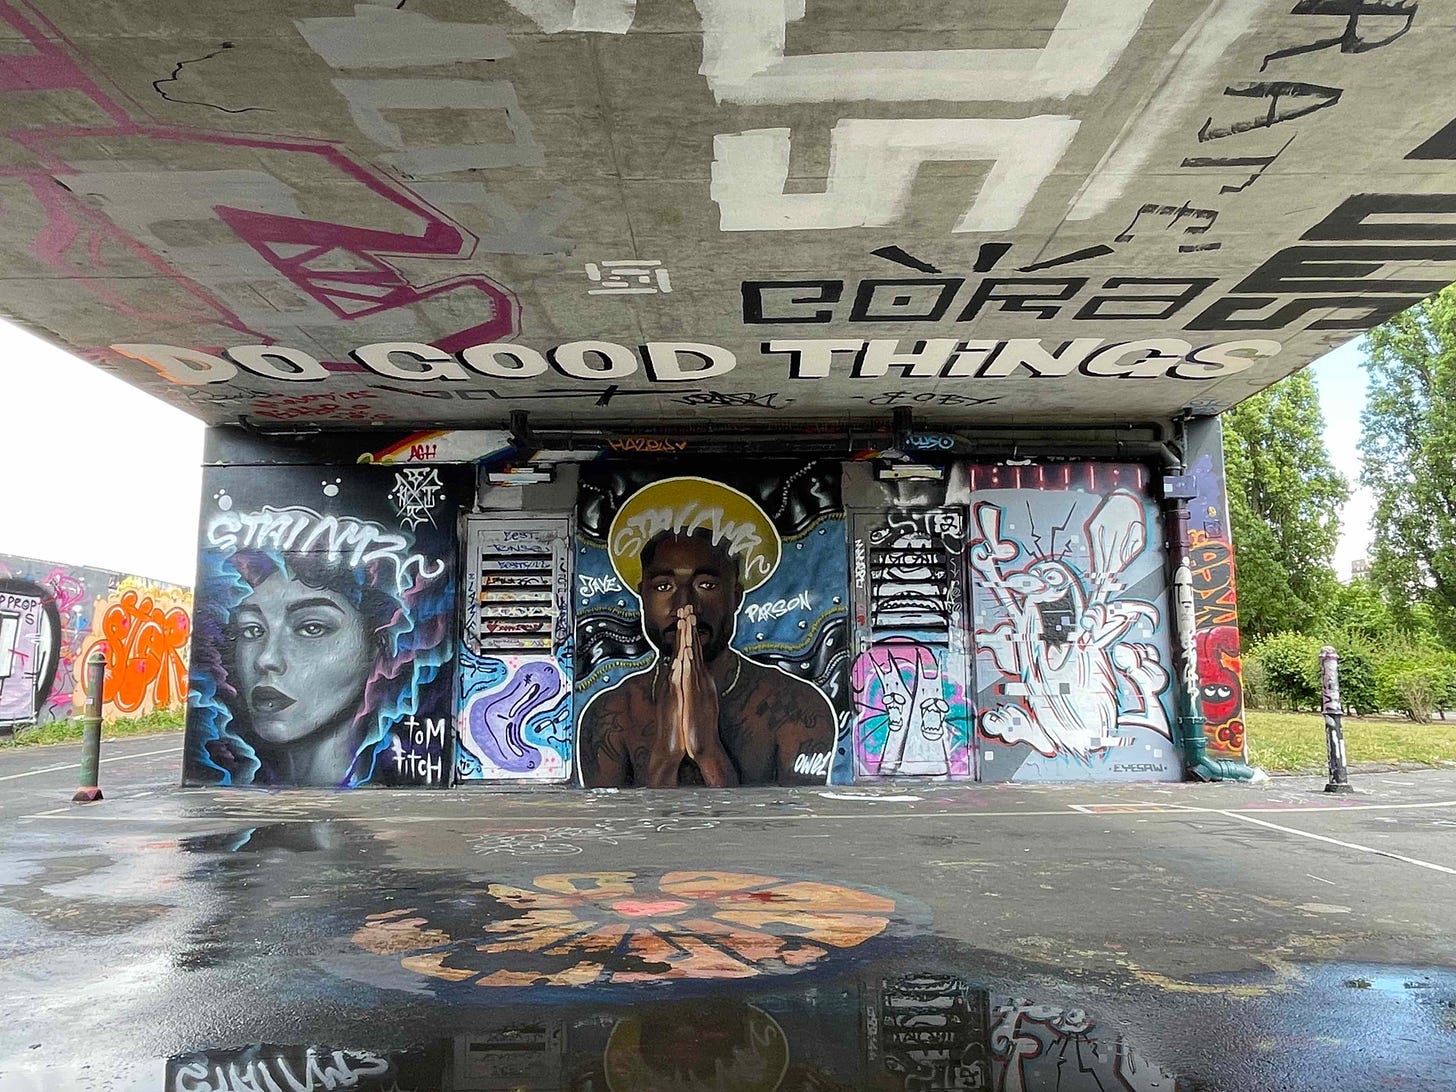 Colour photo showing the wall beneath a railway bridge that is covered in graffiti art depicting a spray painted woman, man and cartoon character, various graffiti tags and the words 'do good things'